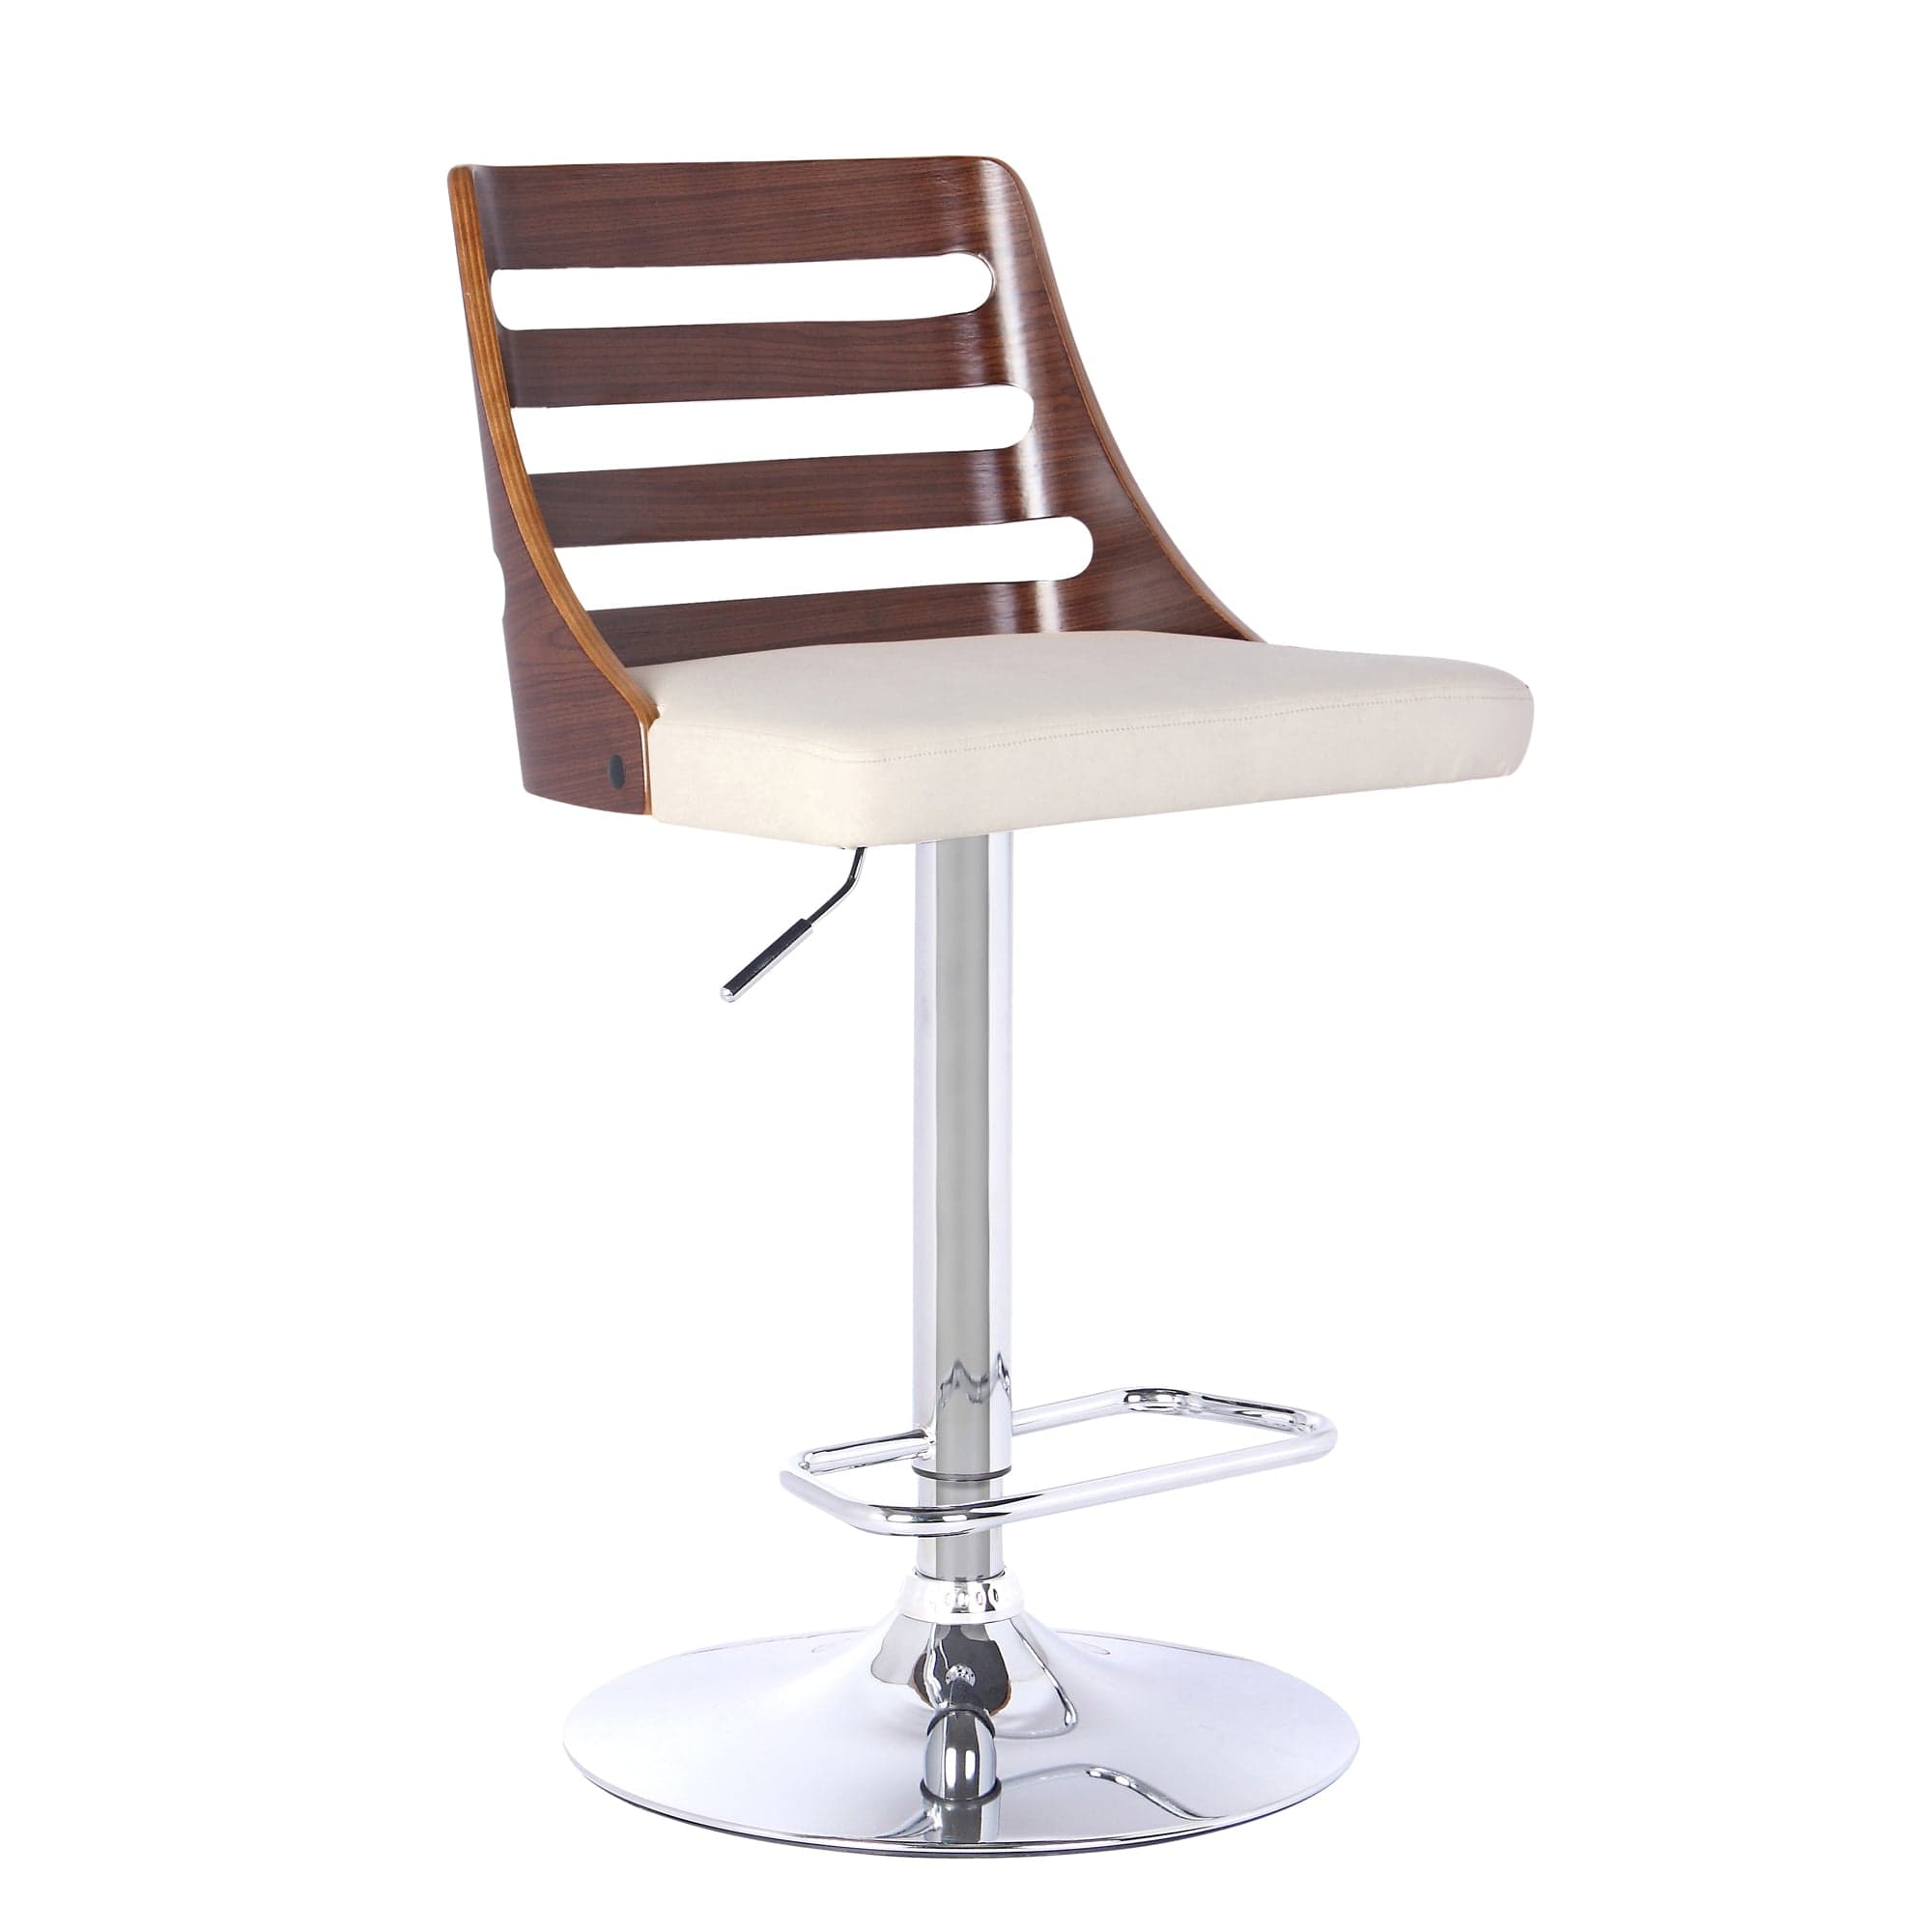 Armen Living Barstool Walnut wood and Cream Faux Leather Armen Living - Storm Barstool in Chrome finish with Walnut wood and Black Faux Leather | LCSTBAWABL